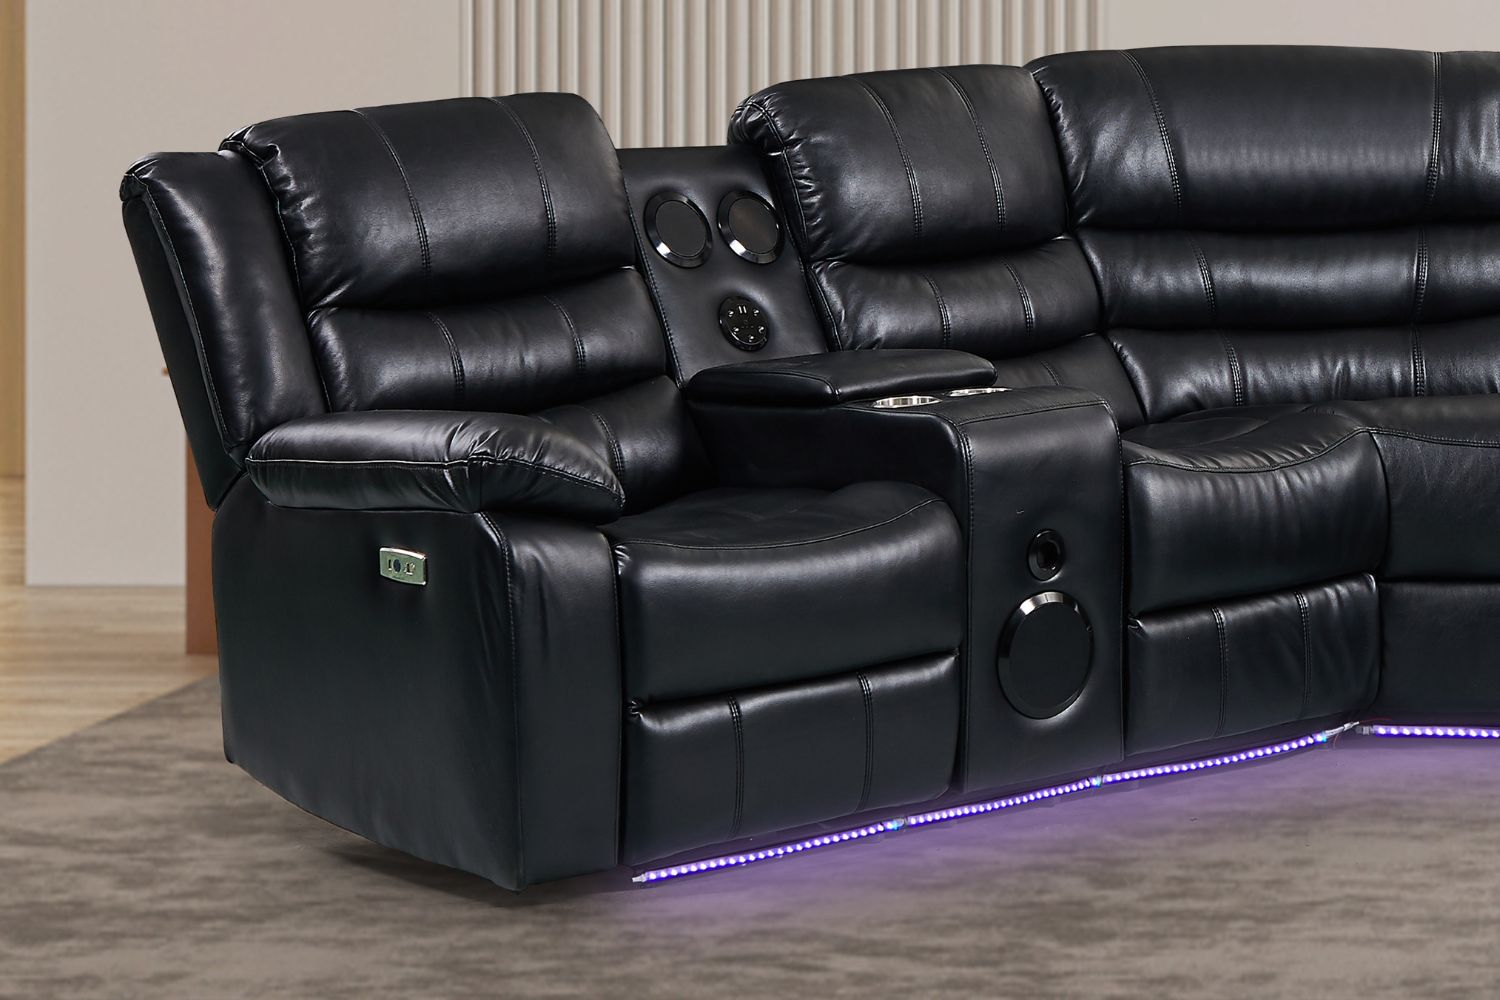 0052880 Modena Air Leather Sectional Power Reclining Sofa With Led Speaker Black 